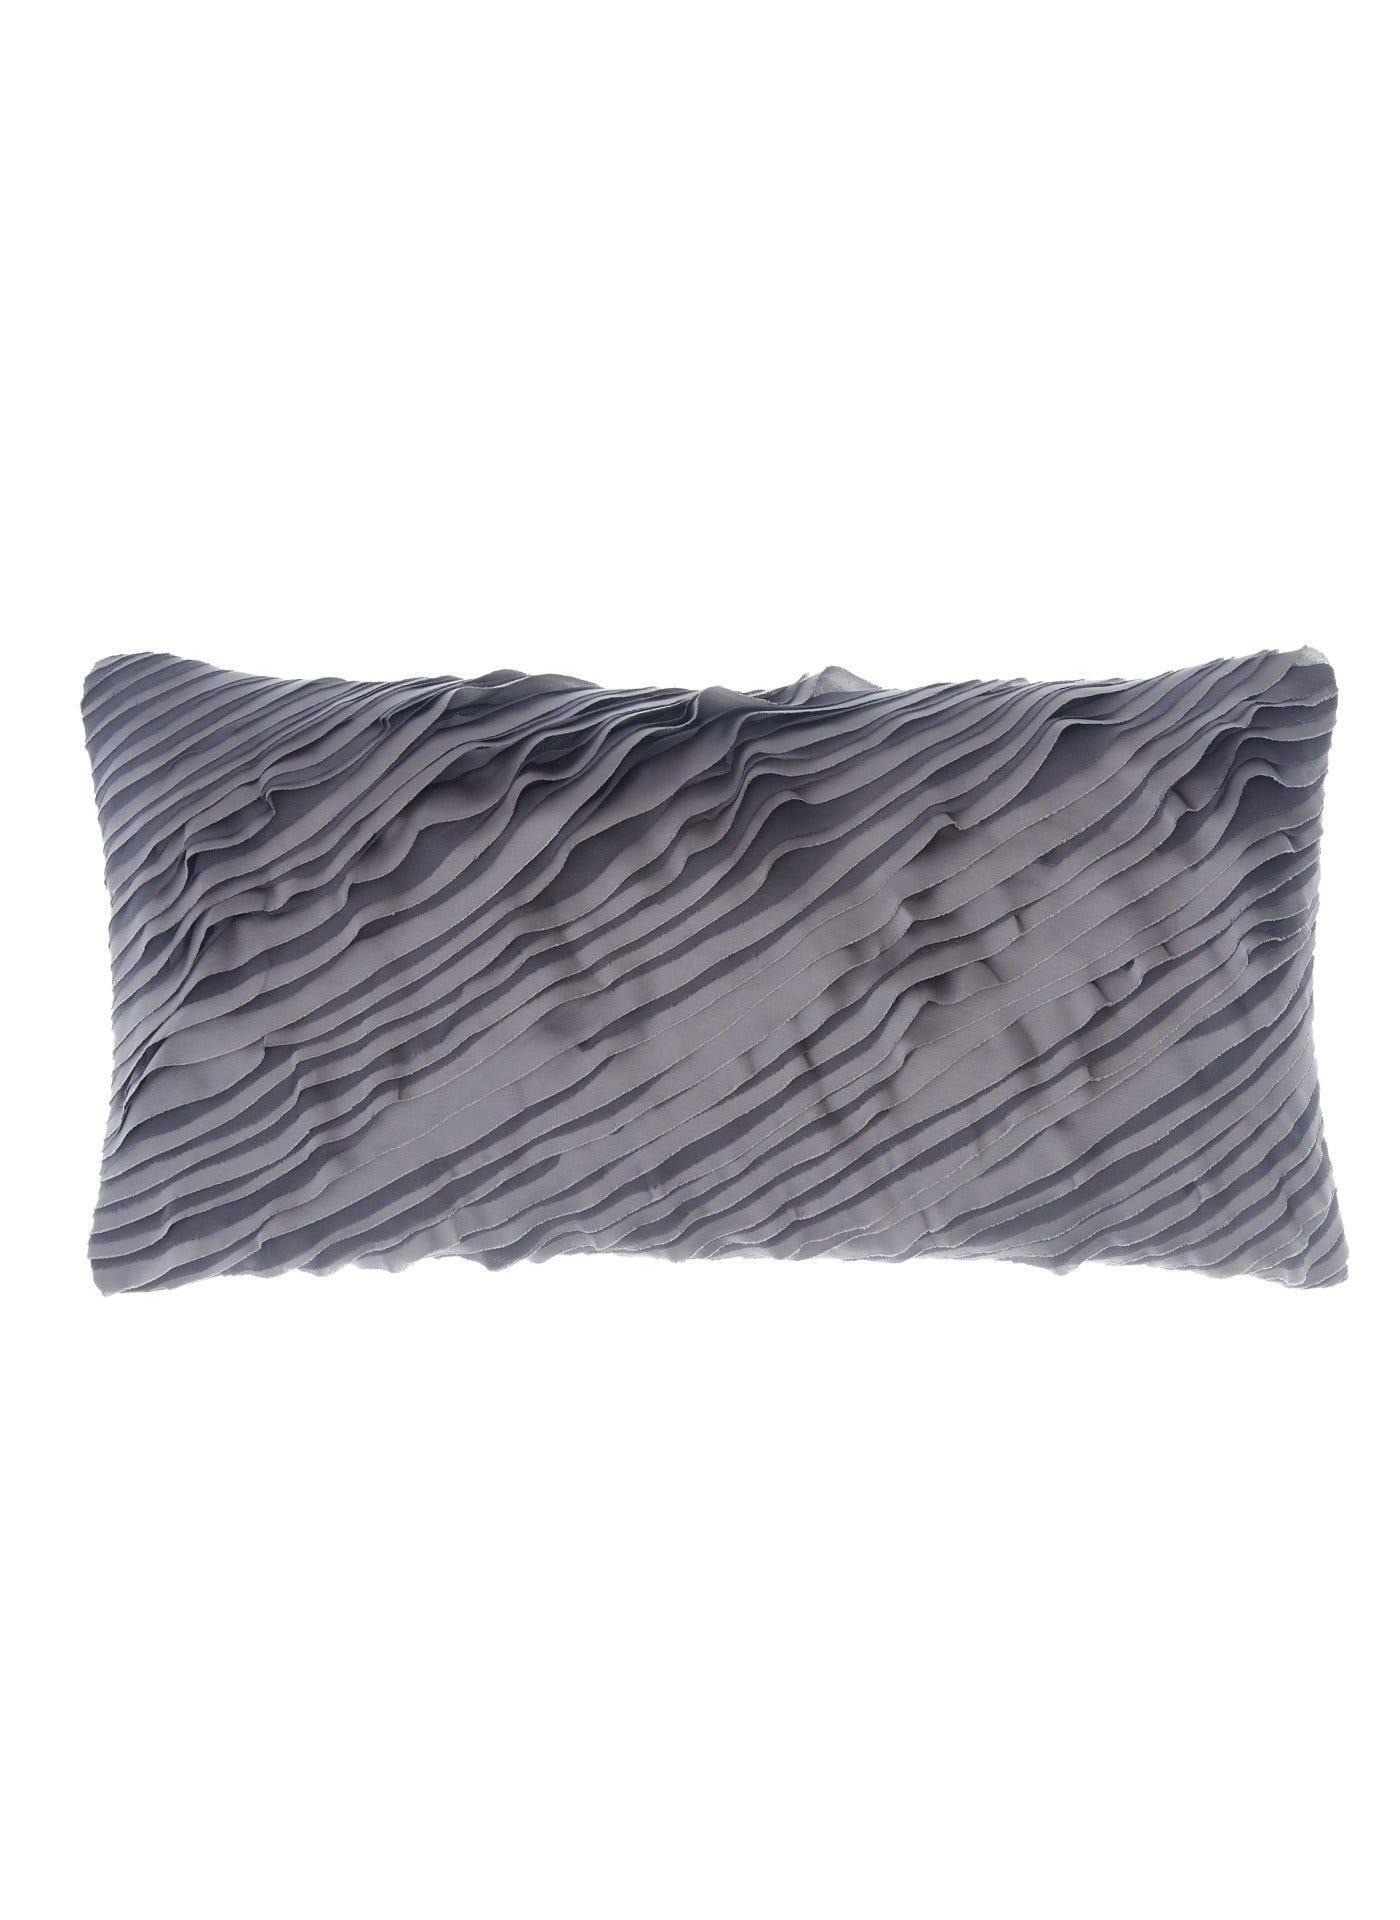 DKNY Gravity Decorative Pillow in Grey